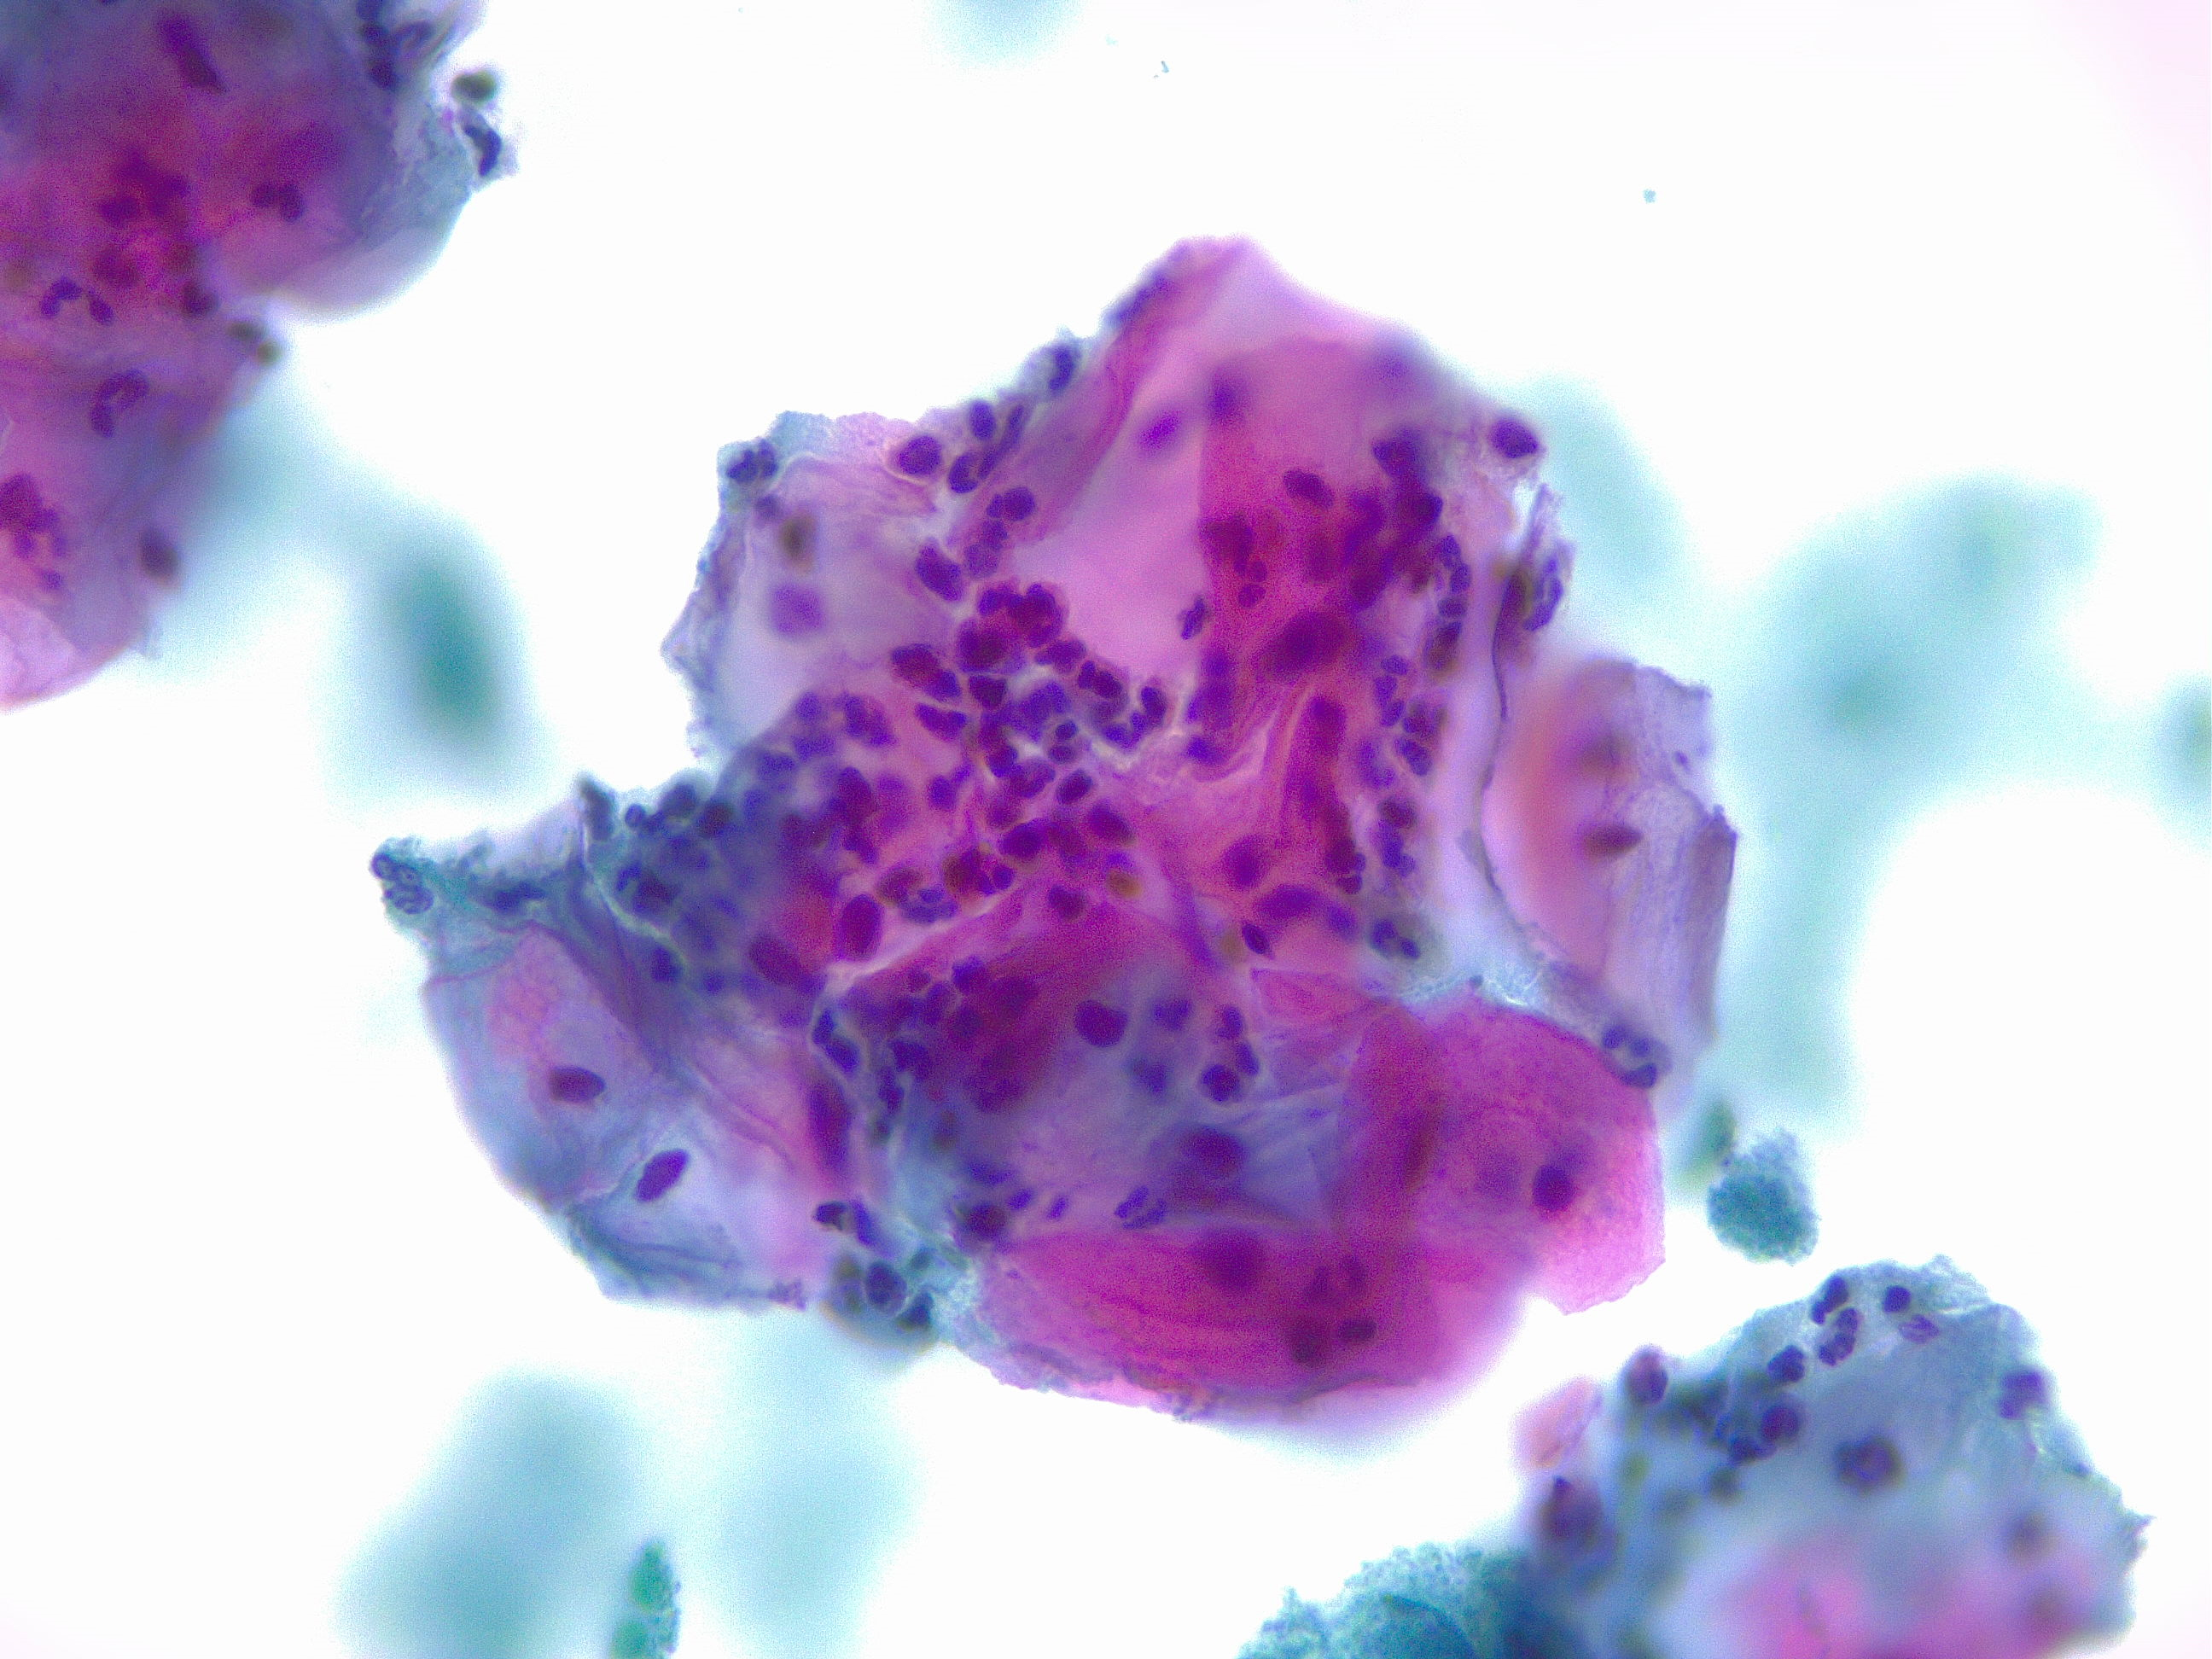 Squamous cells, acute inflammation. Cytology, papanicolaou stain 40x